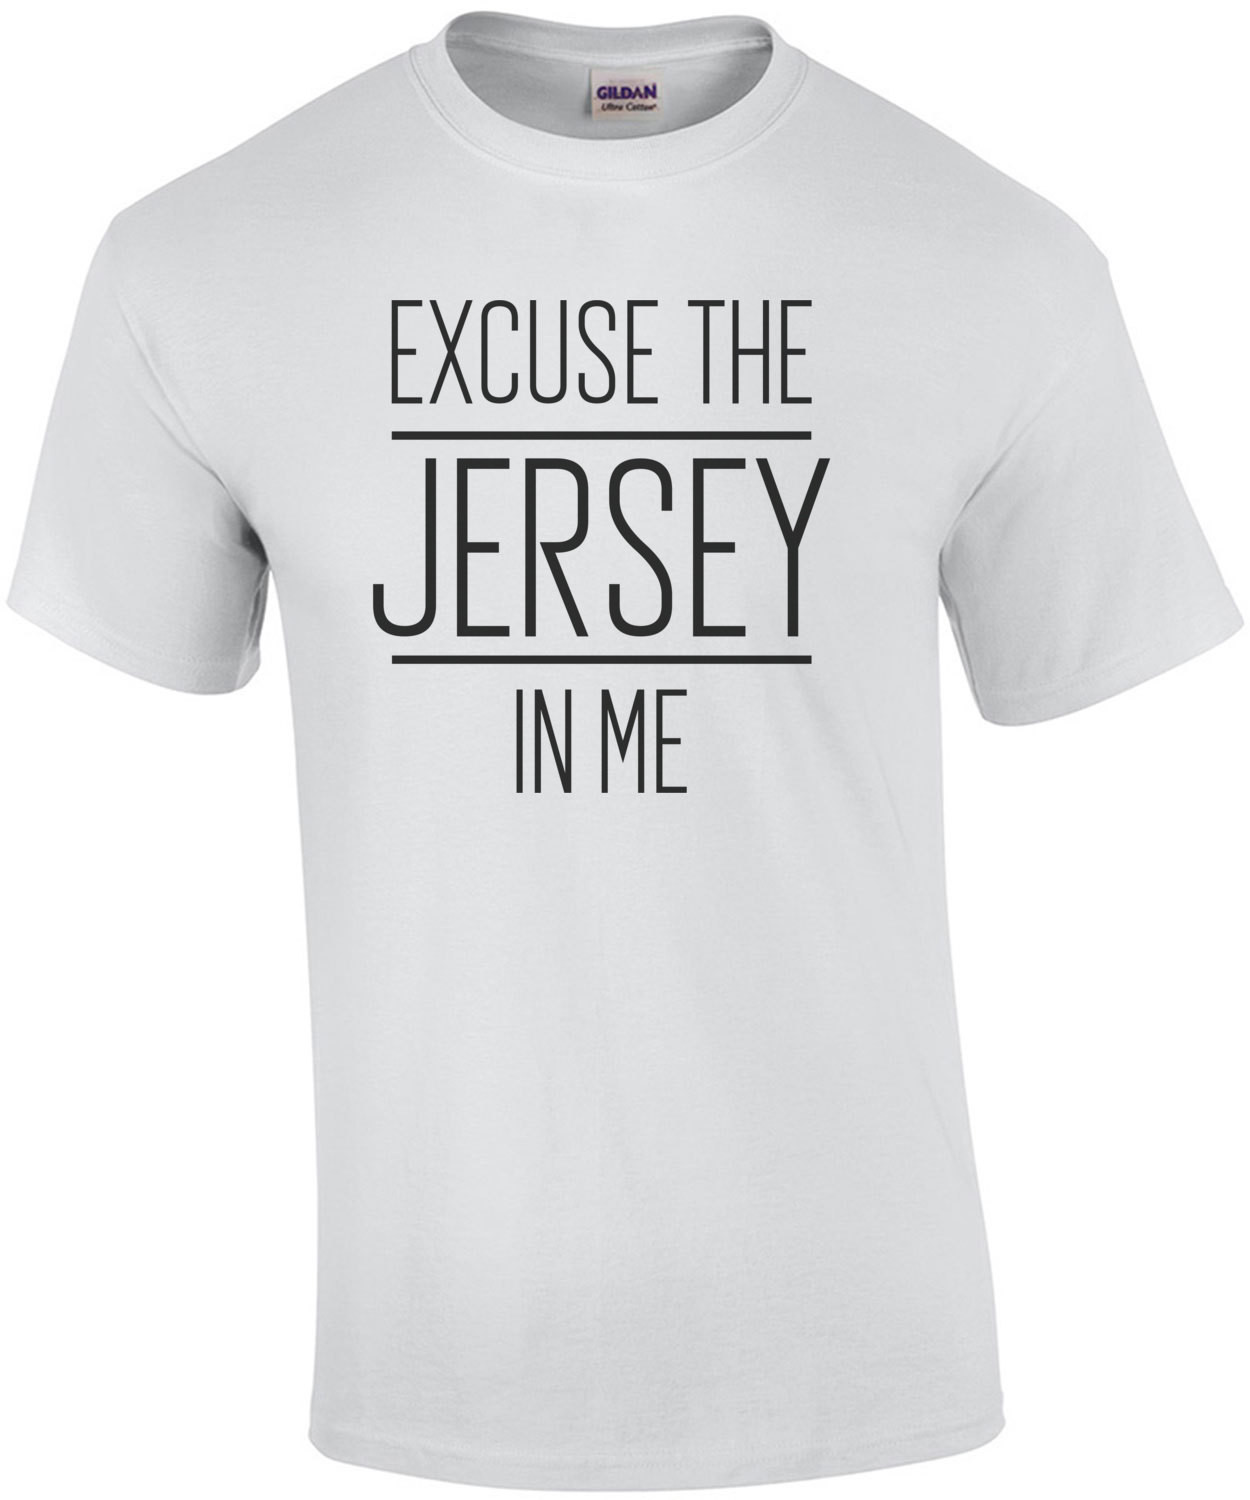 Excuse the Jersey in me - New Jersey T-Shirt